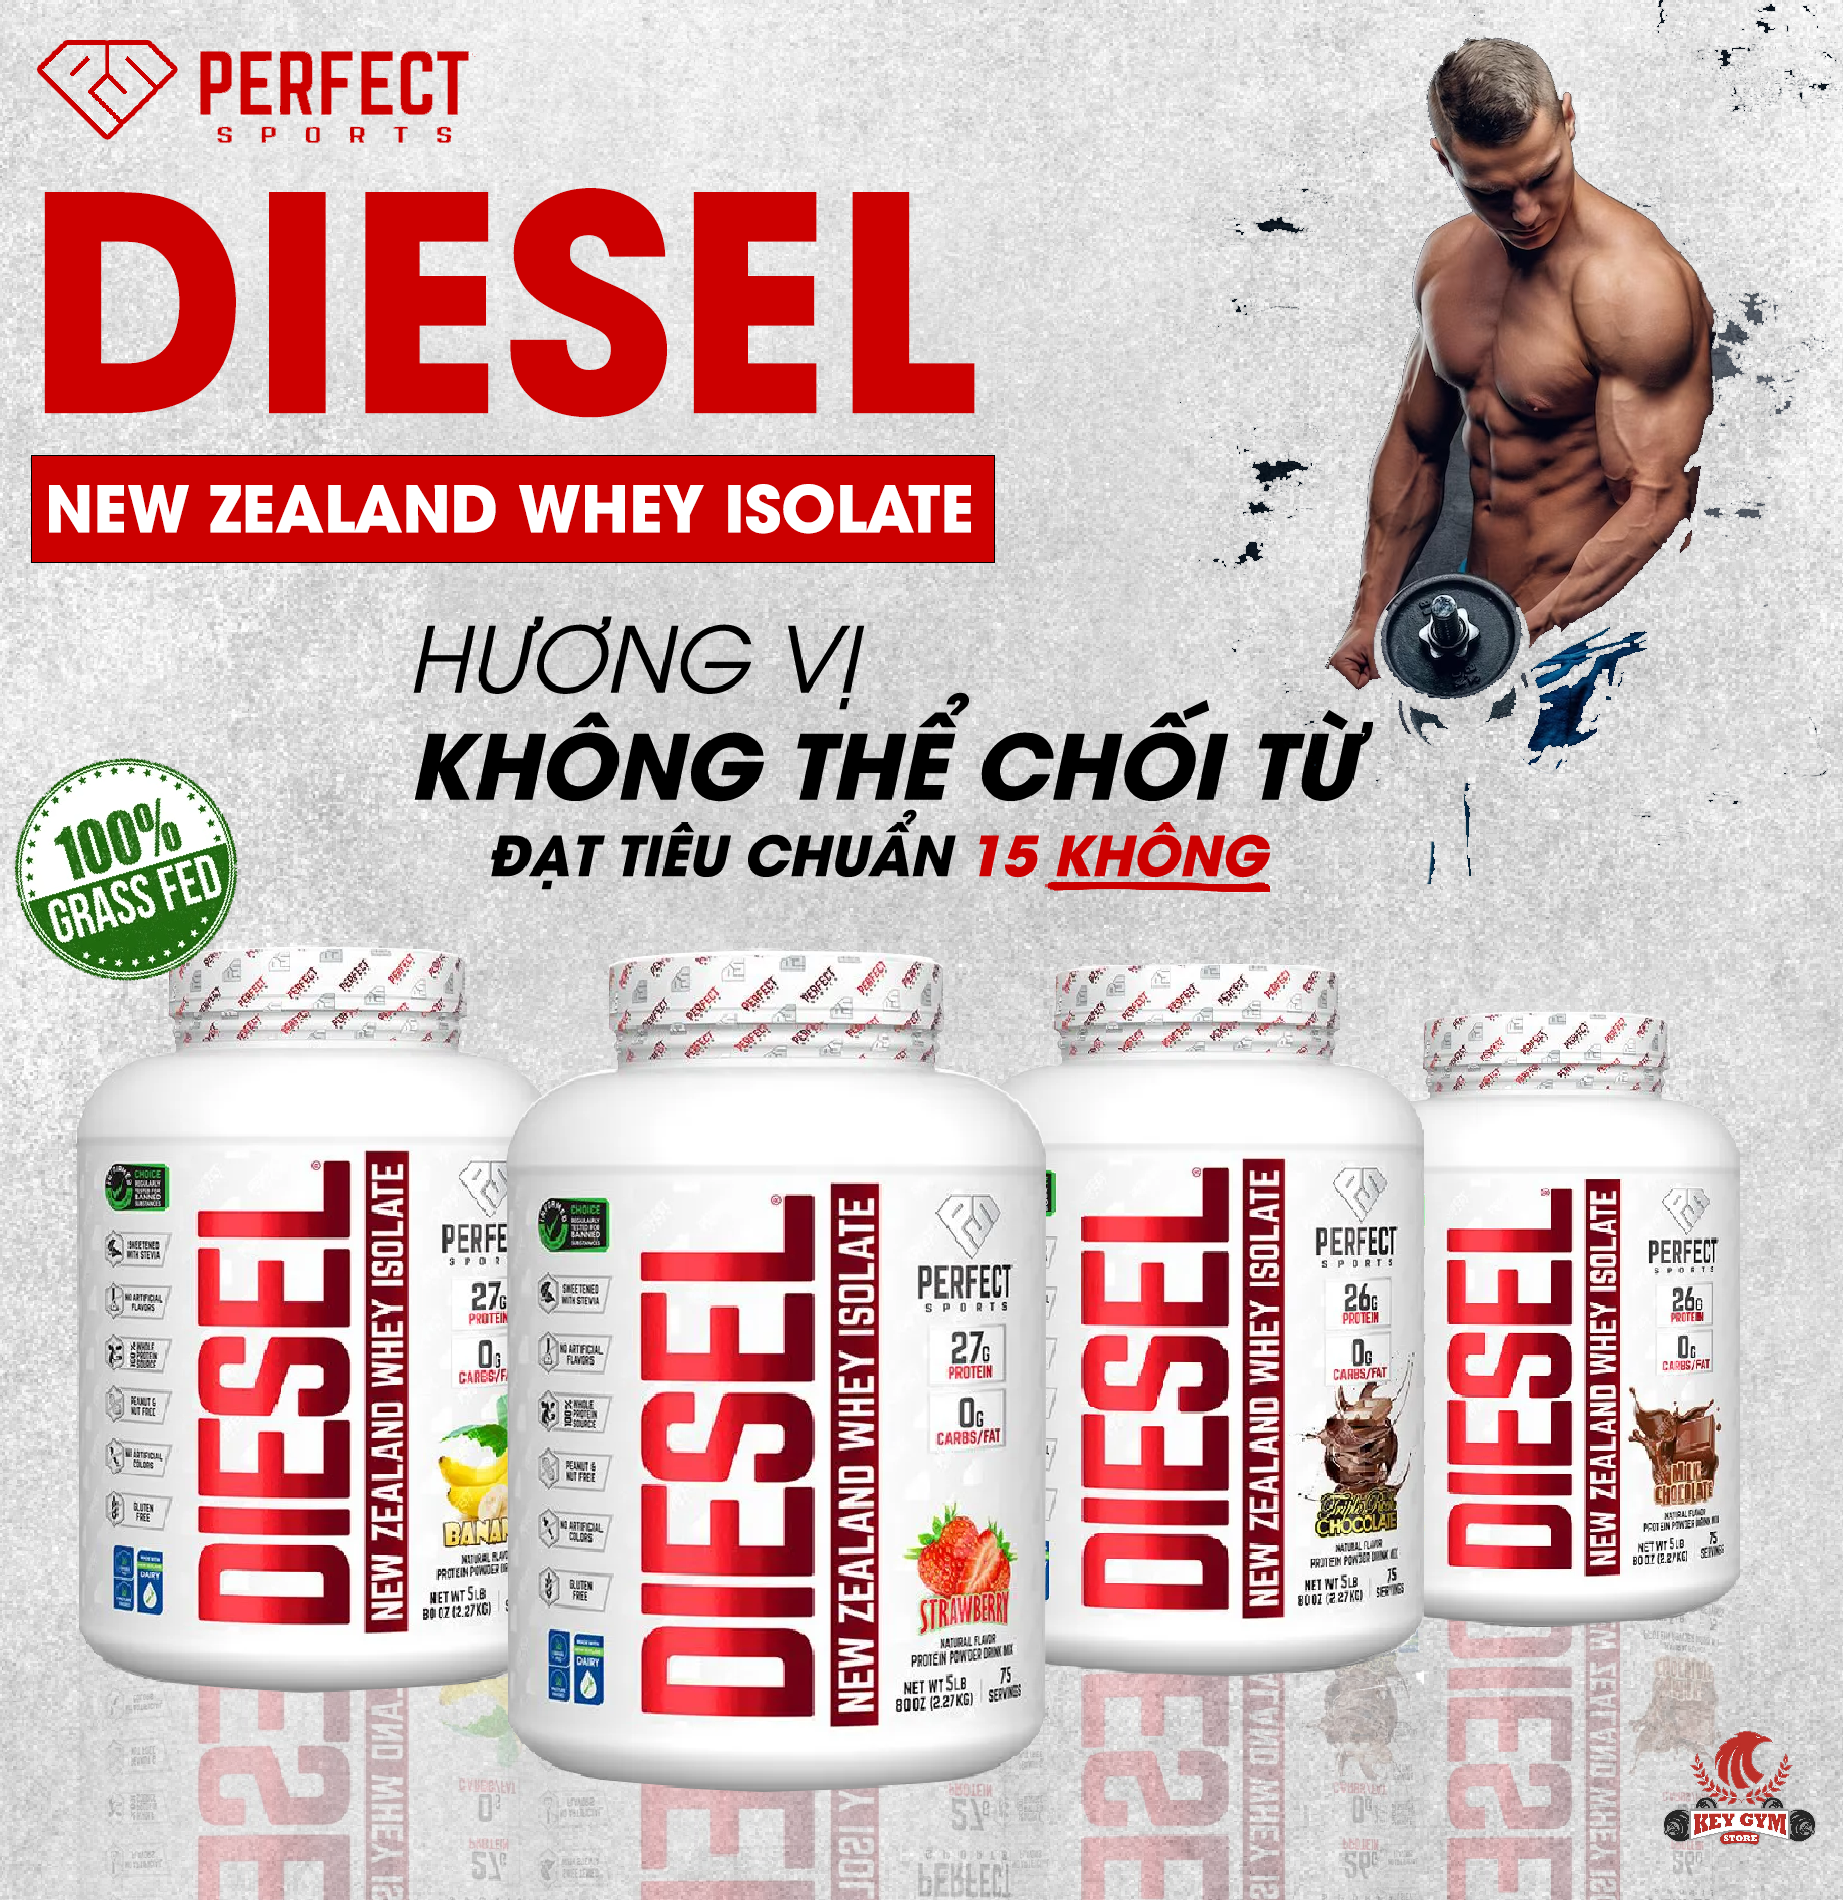 Diesel Whey Isolate New Zealand